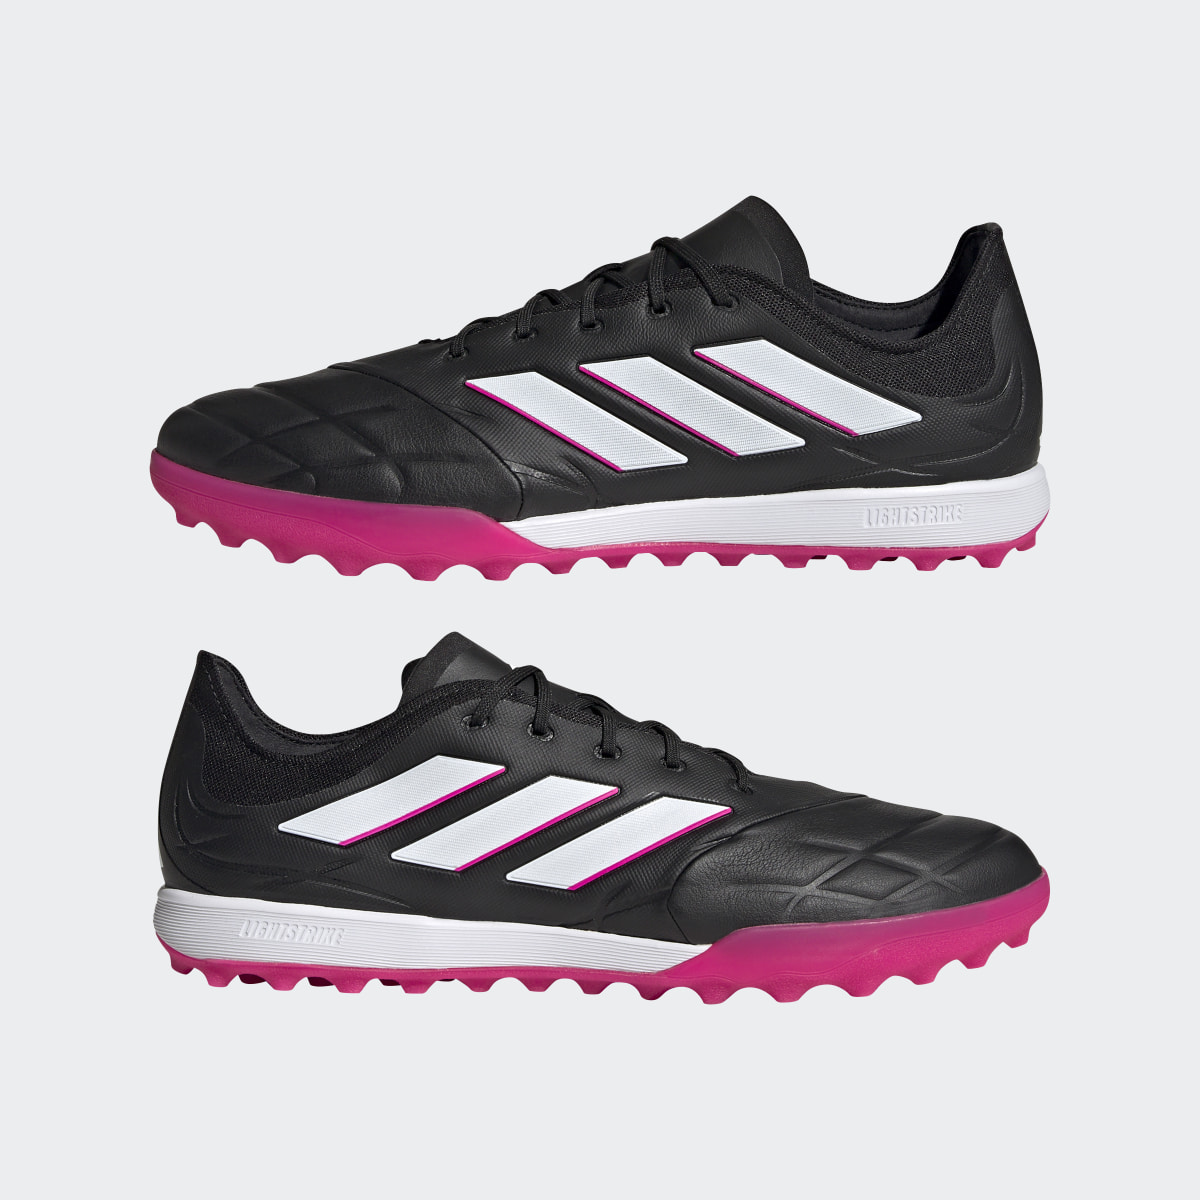 Adidas Copa Pure.1 Turf Boots. 11